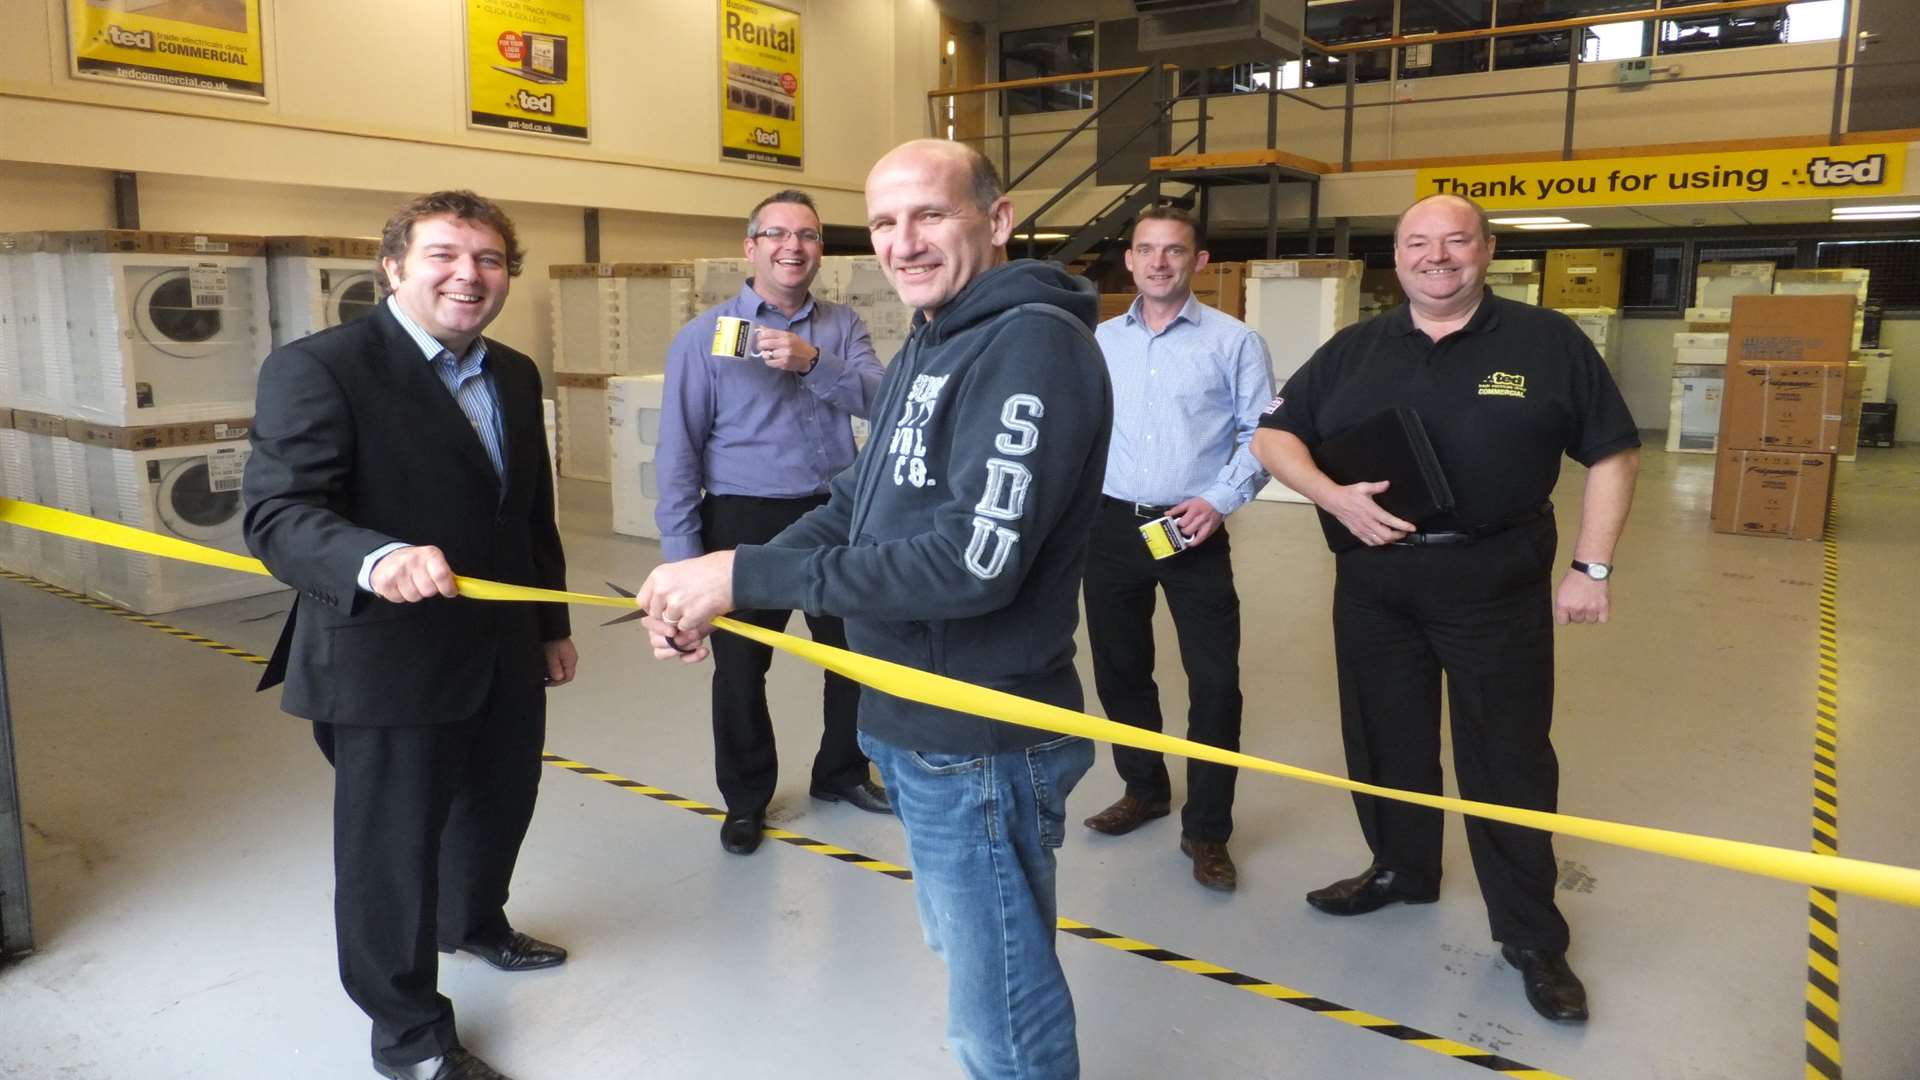 Simon Garrett-Tuffney and Paul Chisnall cut the ribbon on the new TED branch with, from left, TED Commercial manager Simon Quinlan, branch team leader Adam Smith-Reeve and senior commercial advisor Mark Whiteacre